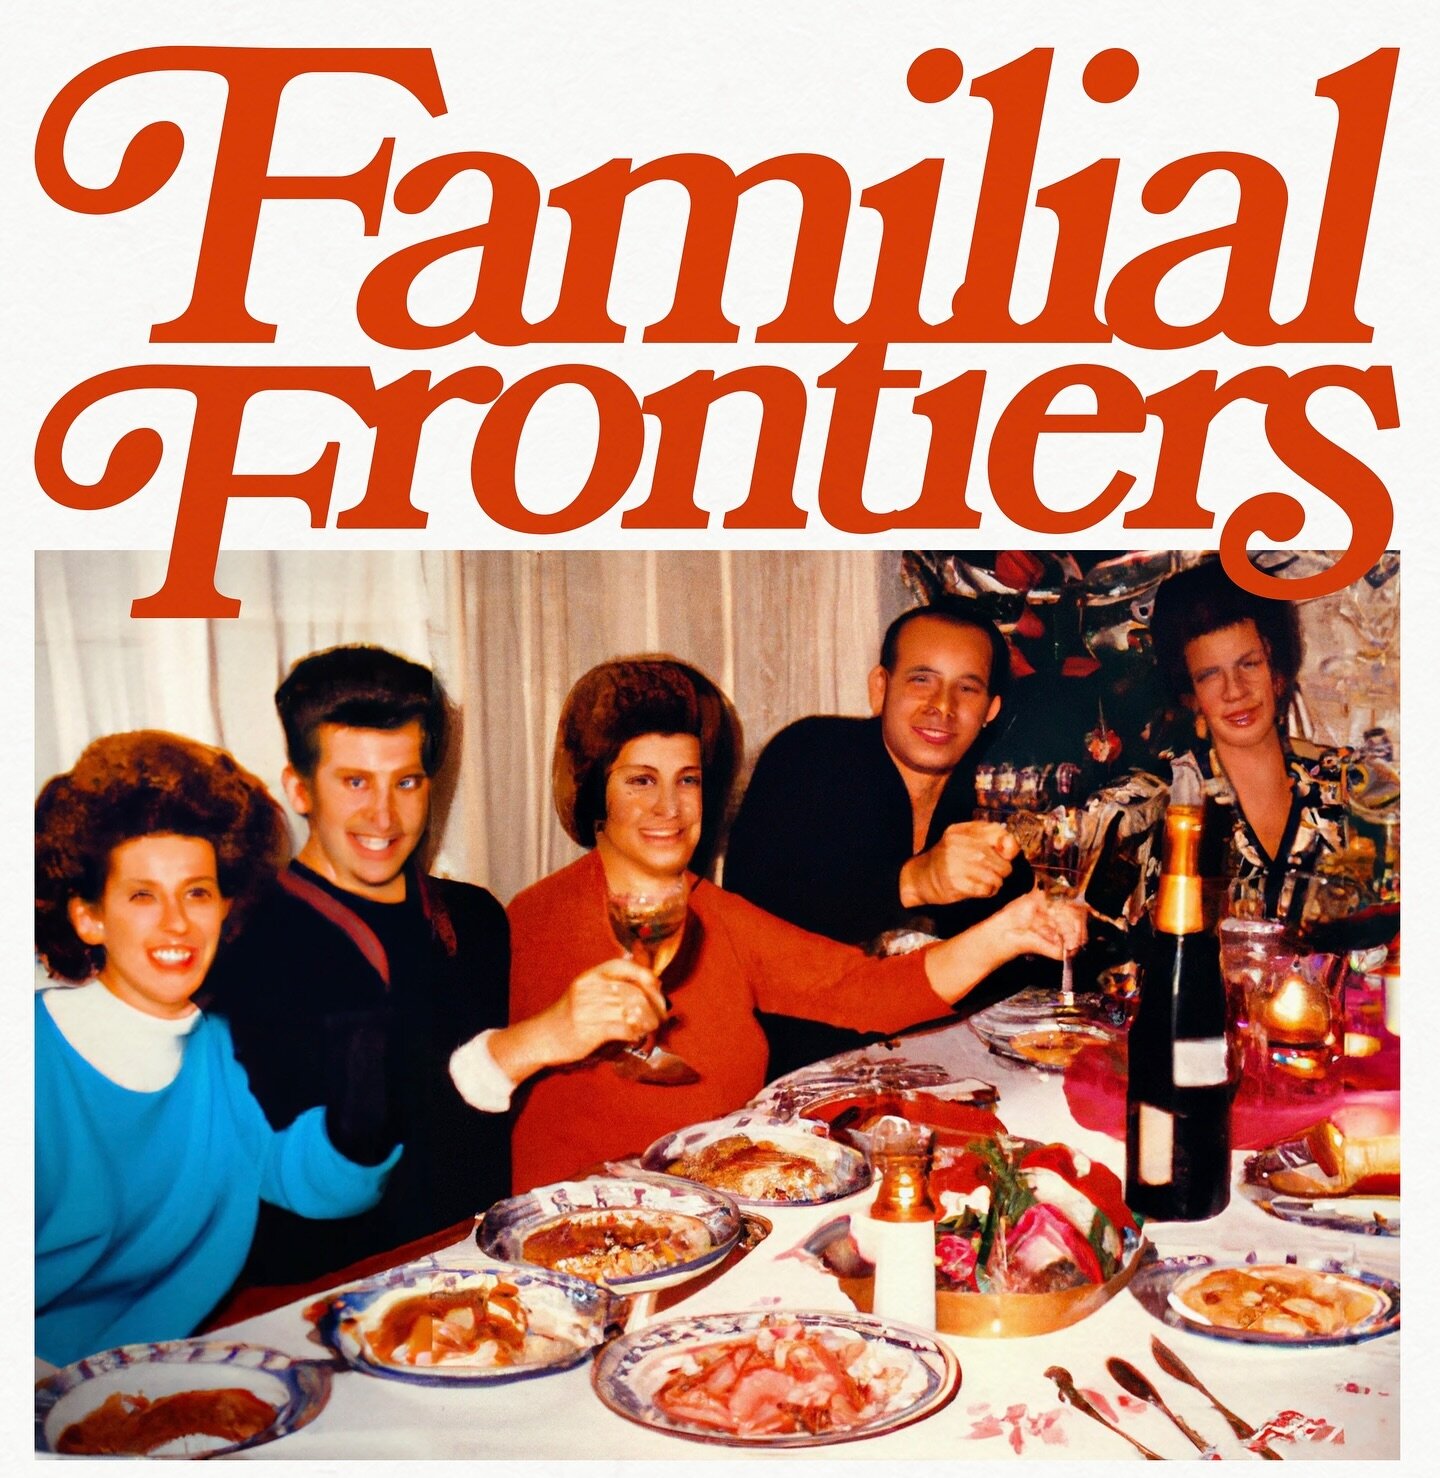 The exhibition &ldquo;Familiar Frontiers&rdquo; opens the next days in New York presenting works from my &ldquo;Family Portraits&rdquo; series and &ldquo;Imagined Images&rdquo;. The show intends to explore generational trauma and the wider socio-poli